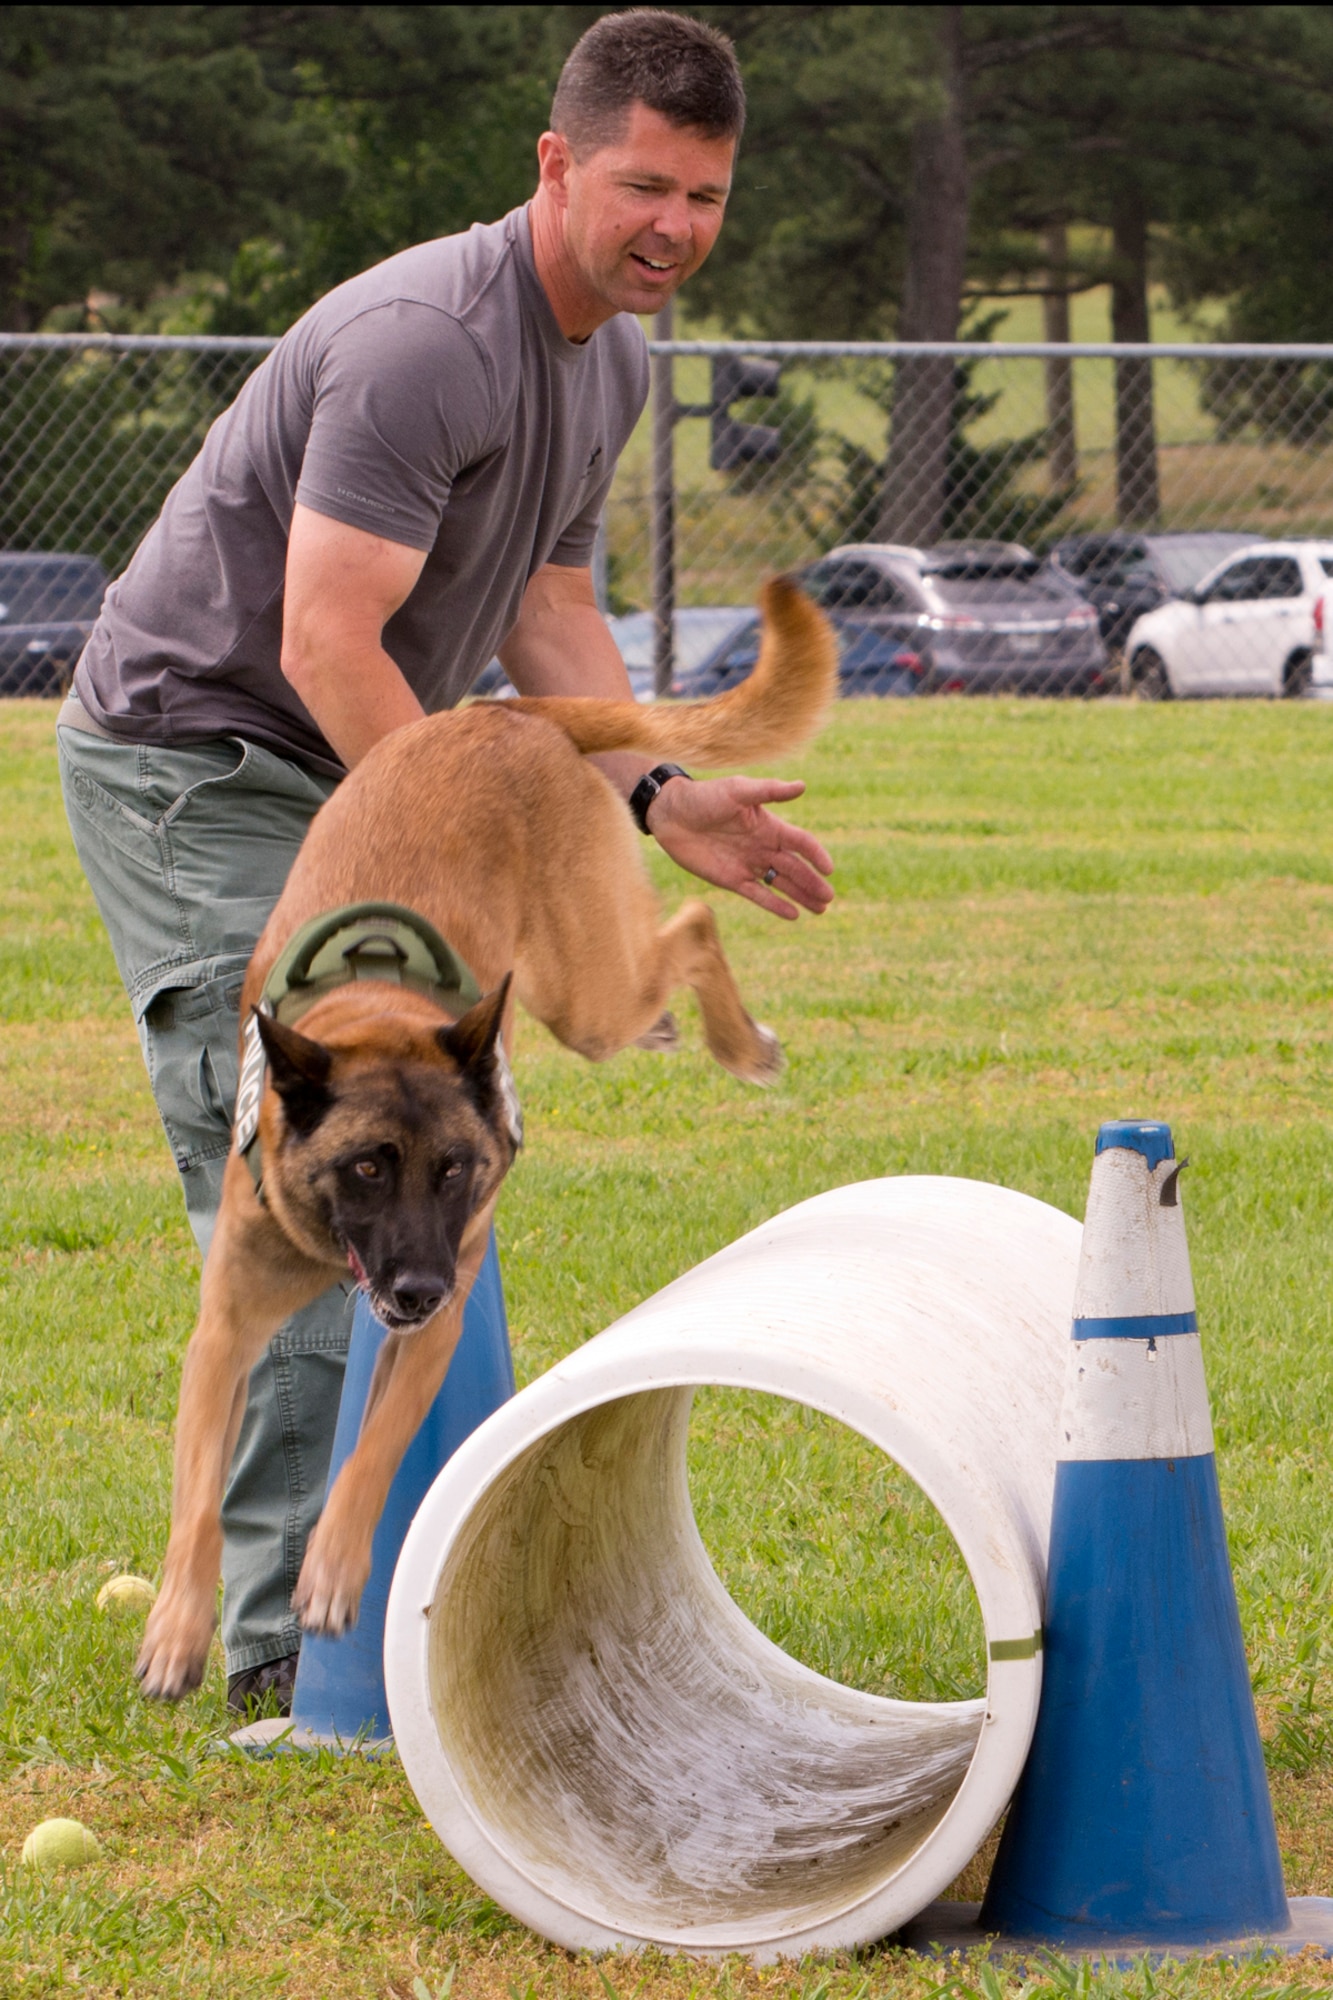 Police Officer Bruce Moyster, of the North Little Rock Police Department, tries to convince K9 Zeus, an 8-year-old Belgian Malinois, to go through a tube during the “Military Working Dog (MWD) Competition" at Little Rock Air Force Base, Ark., May 17, 2017. Zeus, a dual purpose K9, narcotics detector and patrol, has no experience going through culverts or tubes and found it easier just to go over it. (U.S. Air Force photo by Master Sgt. Jeff Walston/Released)